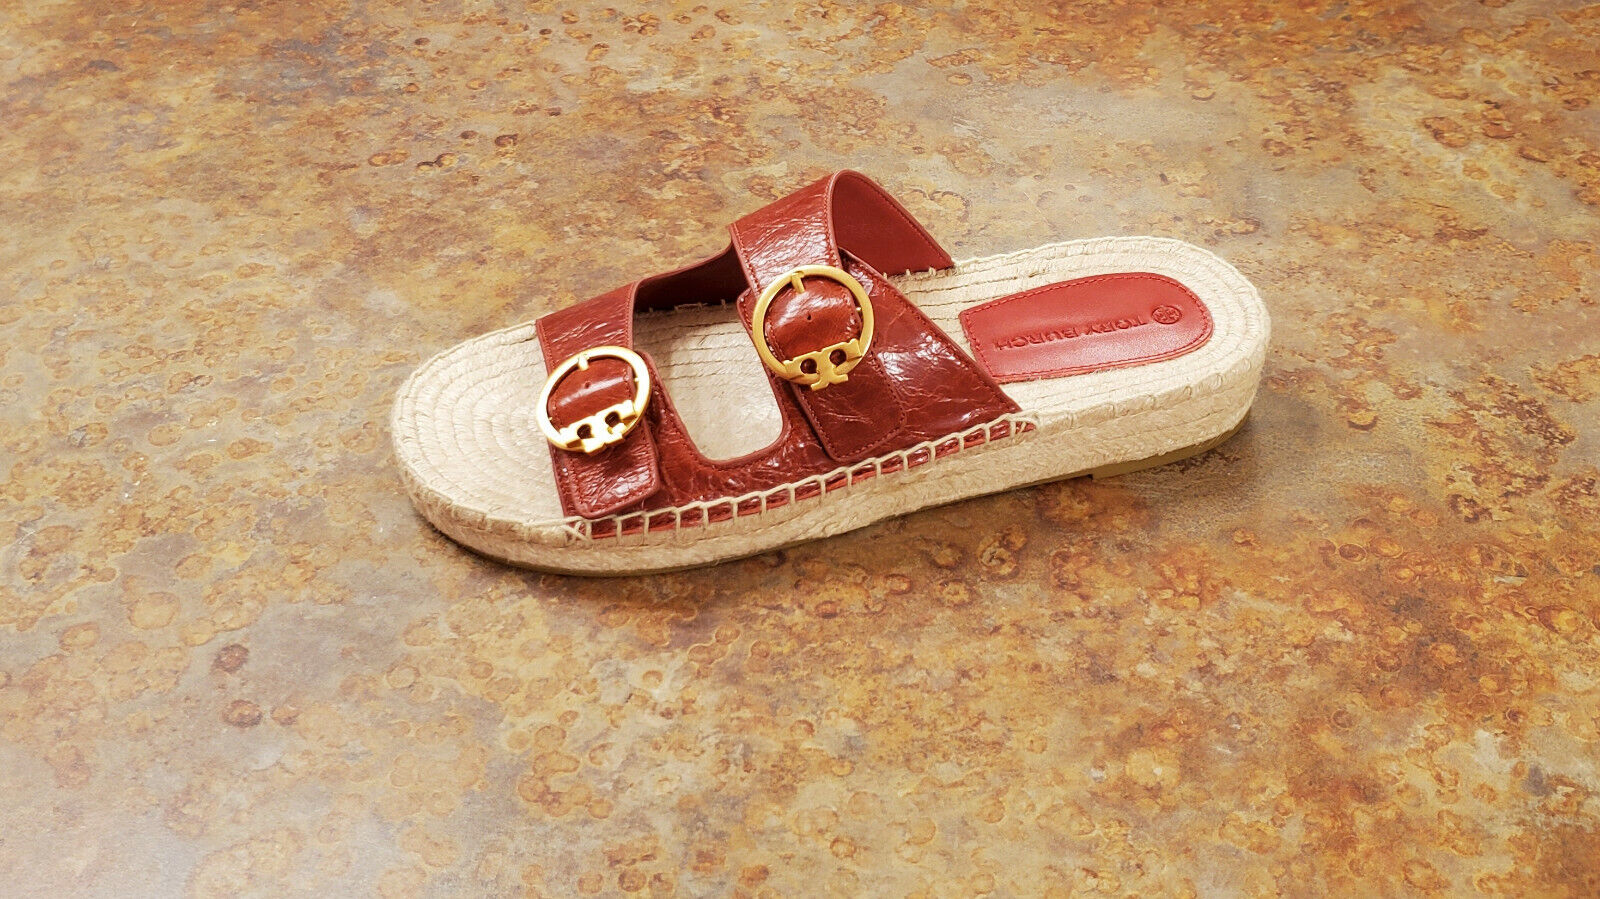 New! Tory Burch 'Selby' Two-Band Espadrille Slide Sandals Womens 8 M MSRP  $265 | eBay